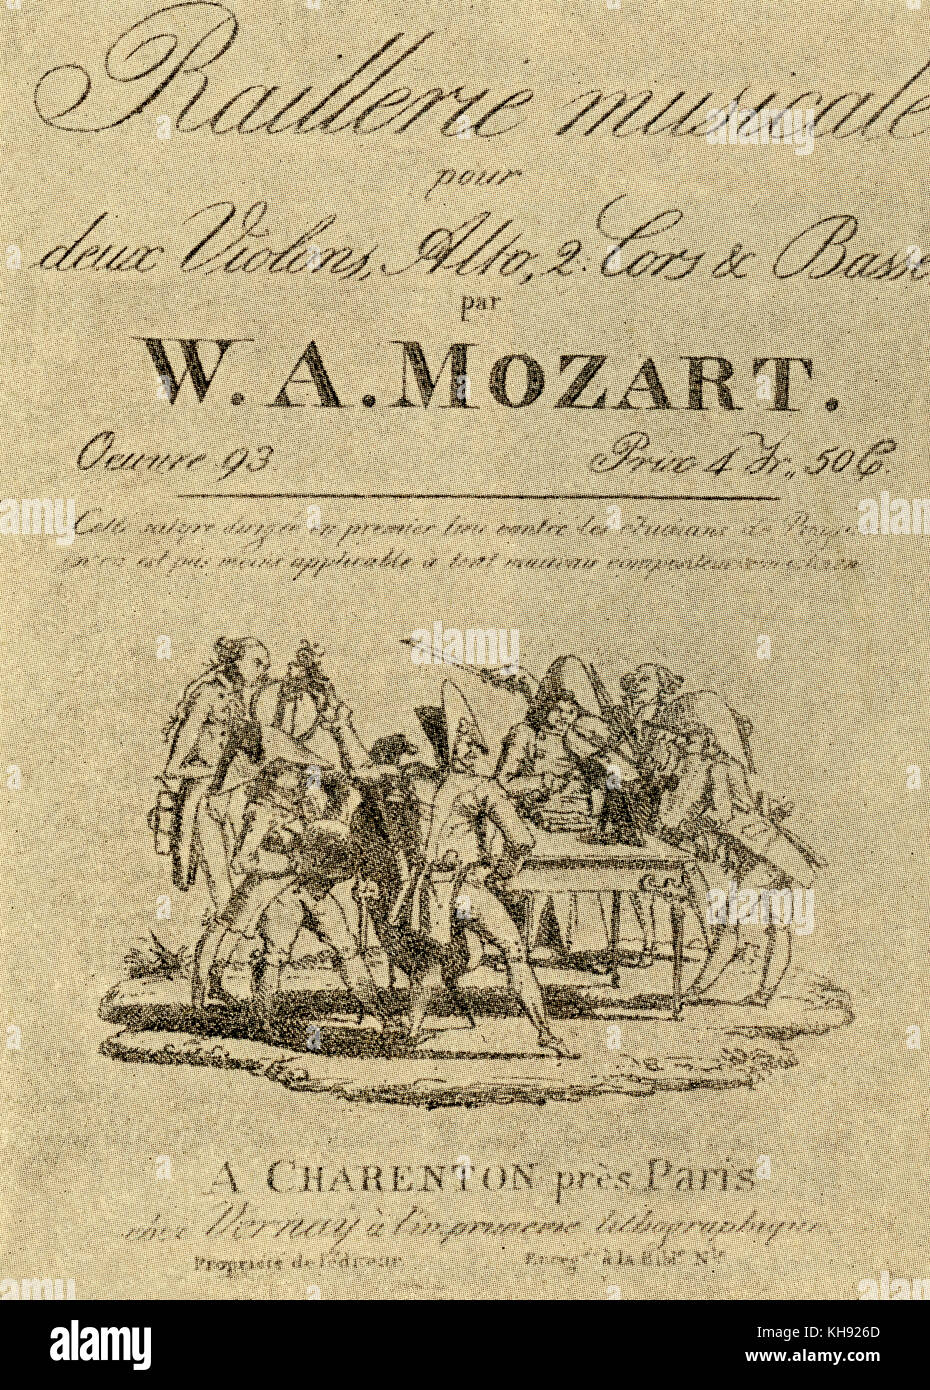 A Musical Joke by Wolfgang Armadeus Mozart: title page. German: Ein musikalischer Spaß. French version. Published at Charenton. Divertimento for two horns and string quartet.  K. 522. WAM: Austrian composer, 27 January 1756 - 5 December 1791. Stock Photo